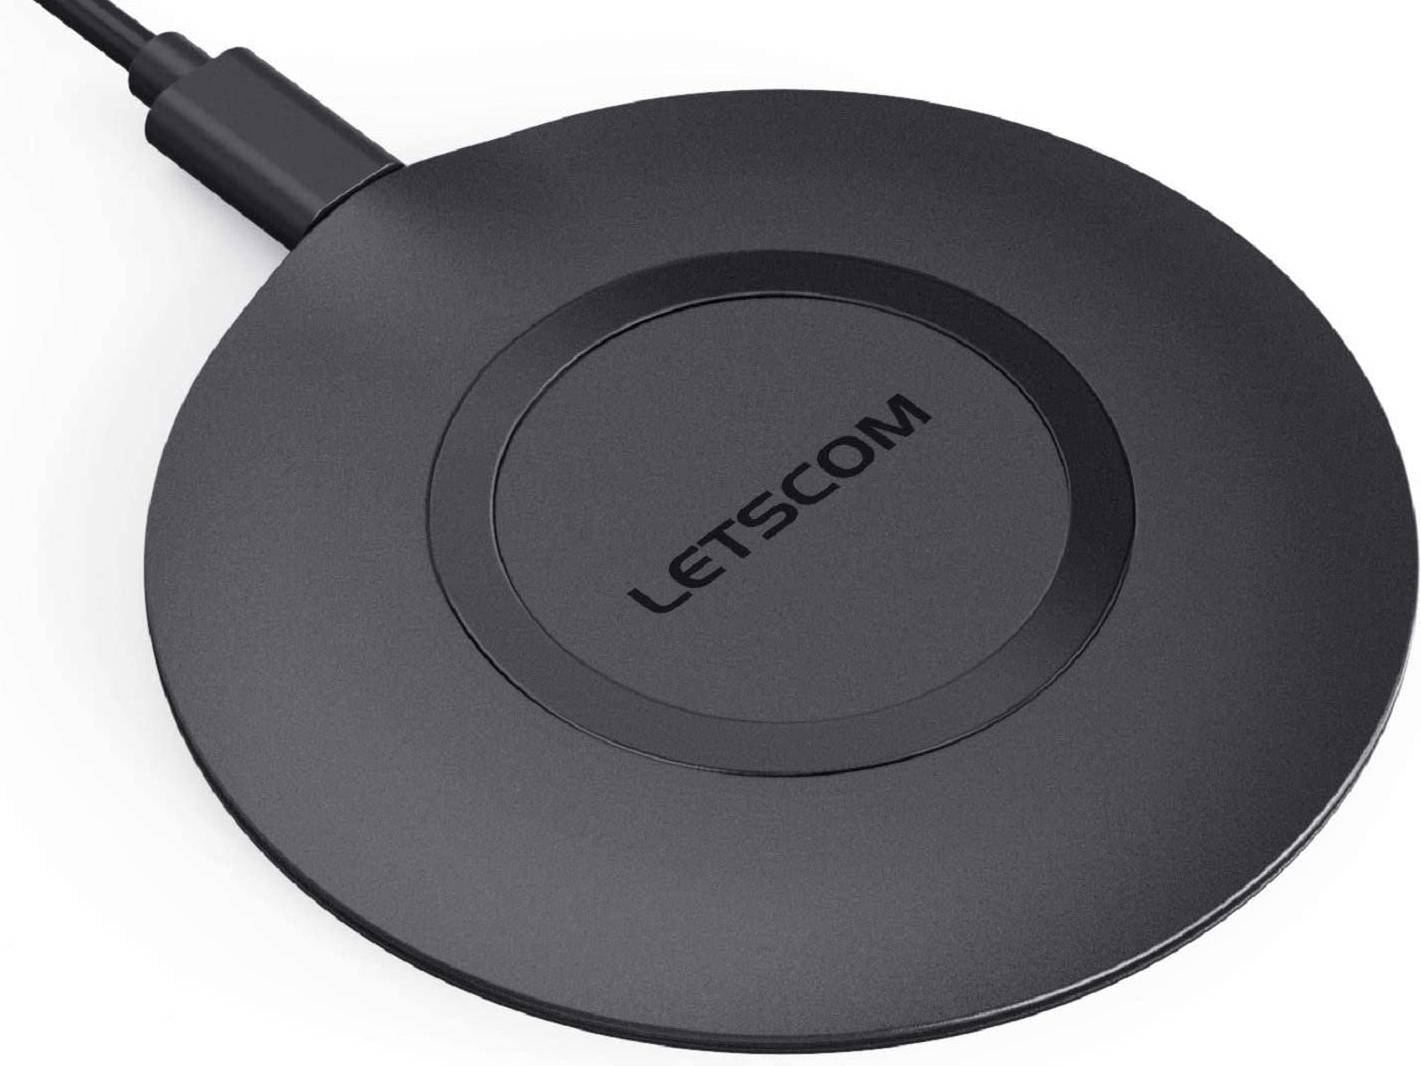 LETSCOM Wireless Charger (£13)